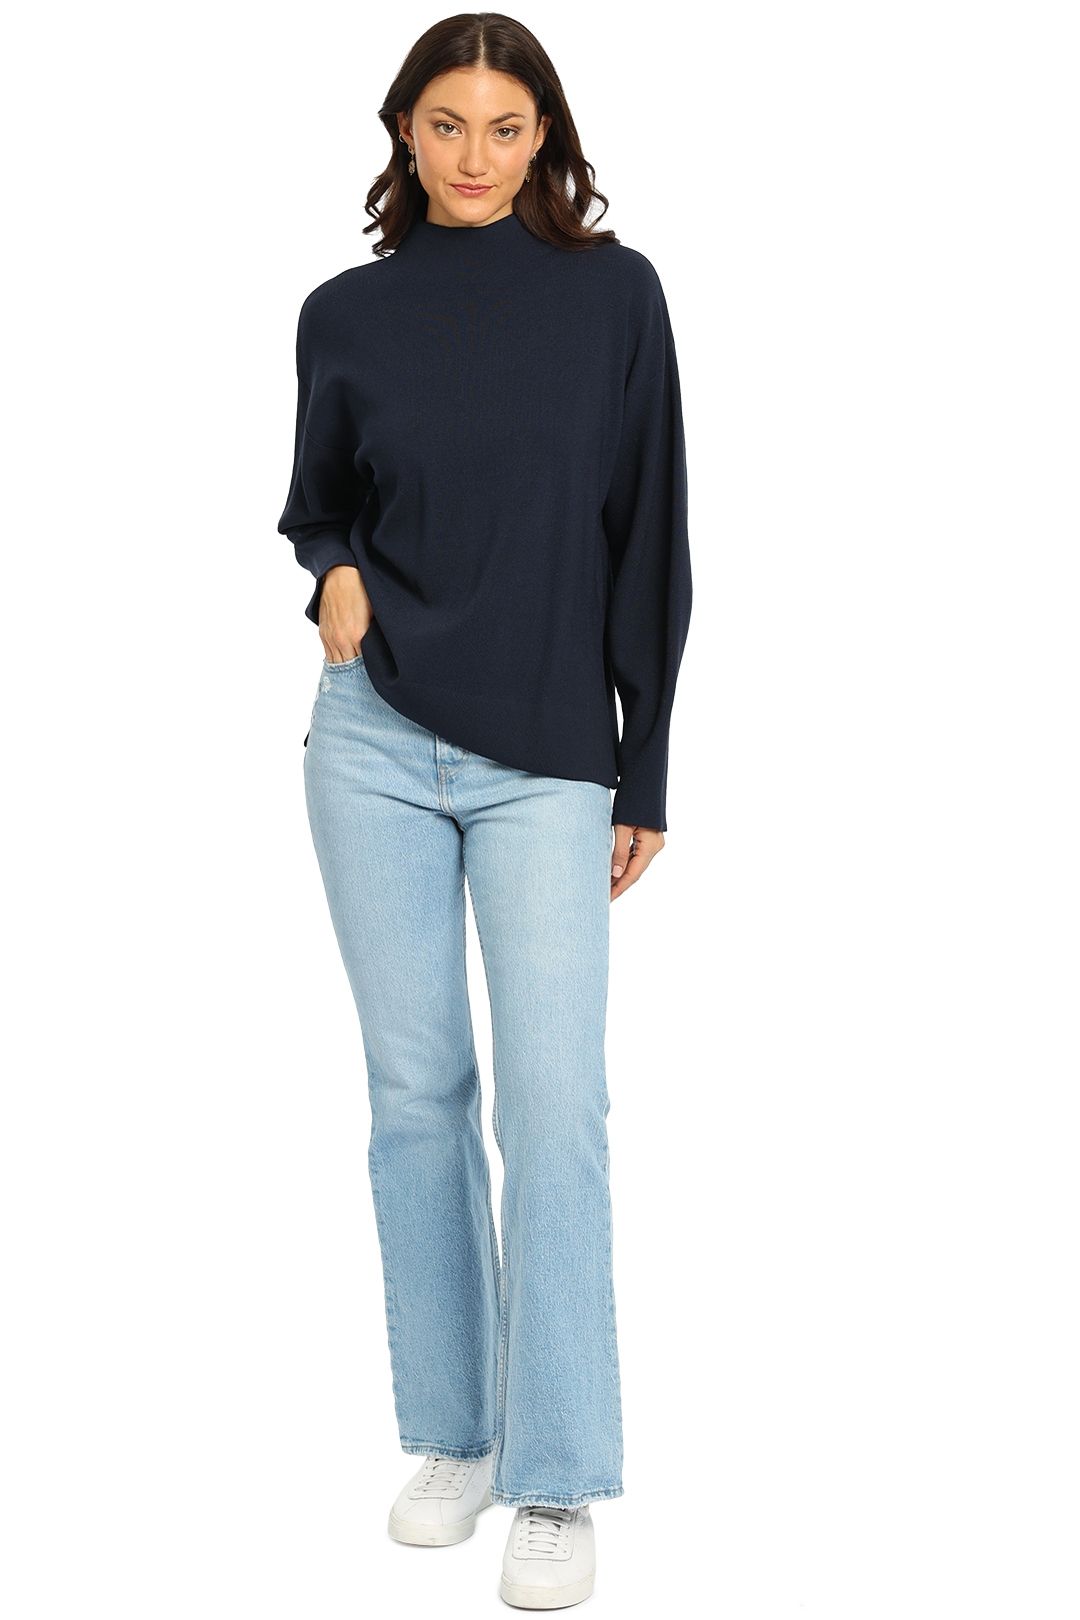 Camilla and Marc Amana Knit Top - Navy slit